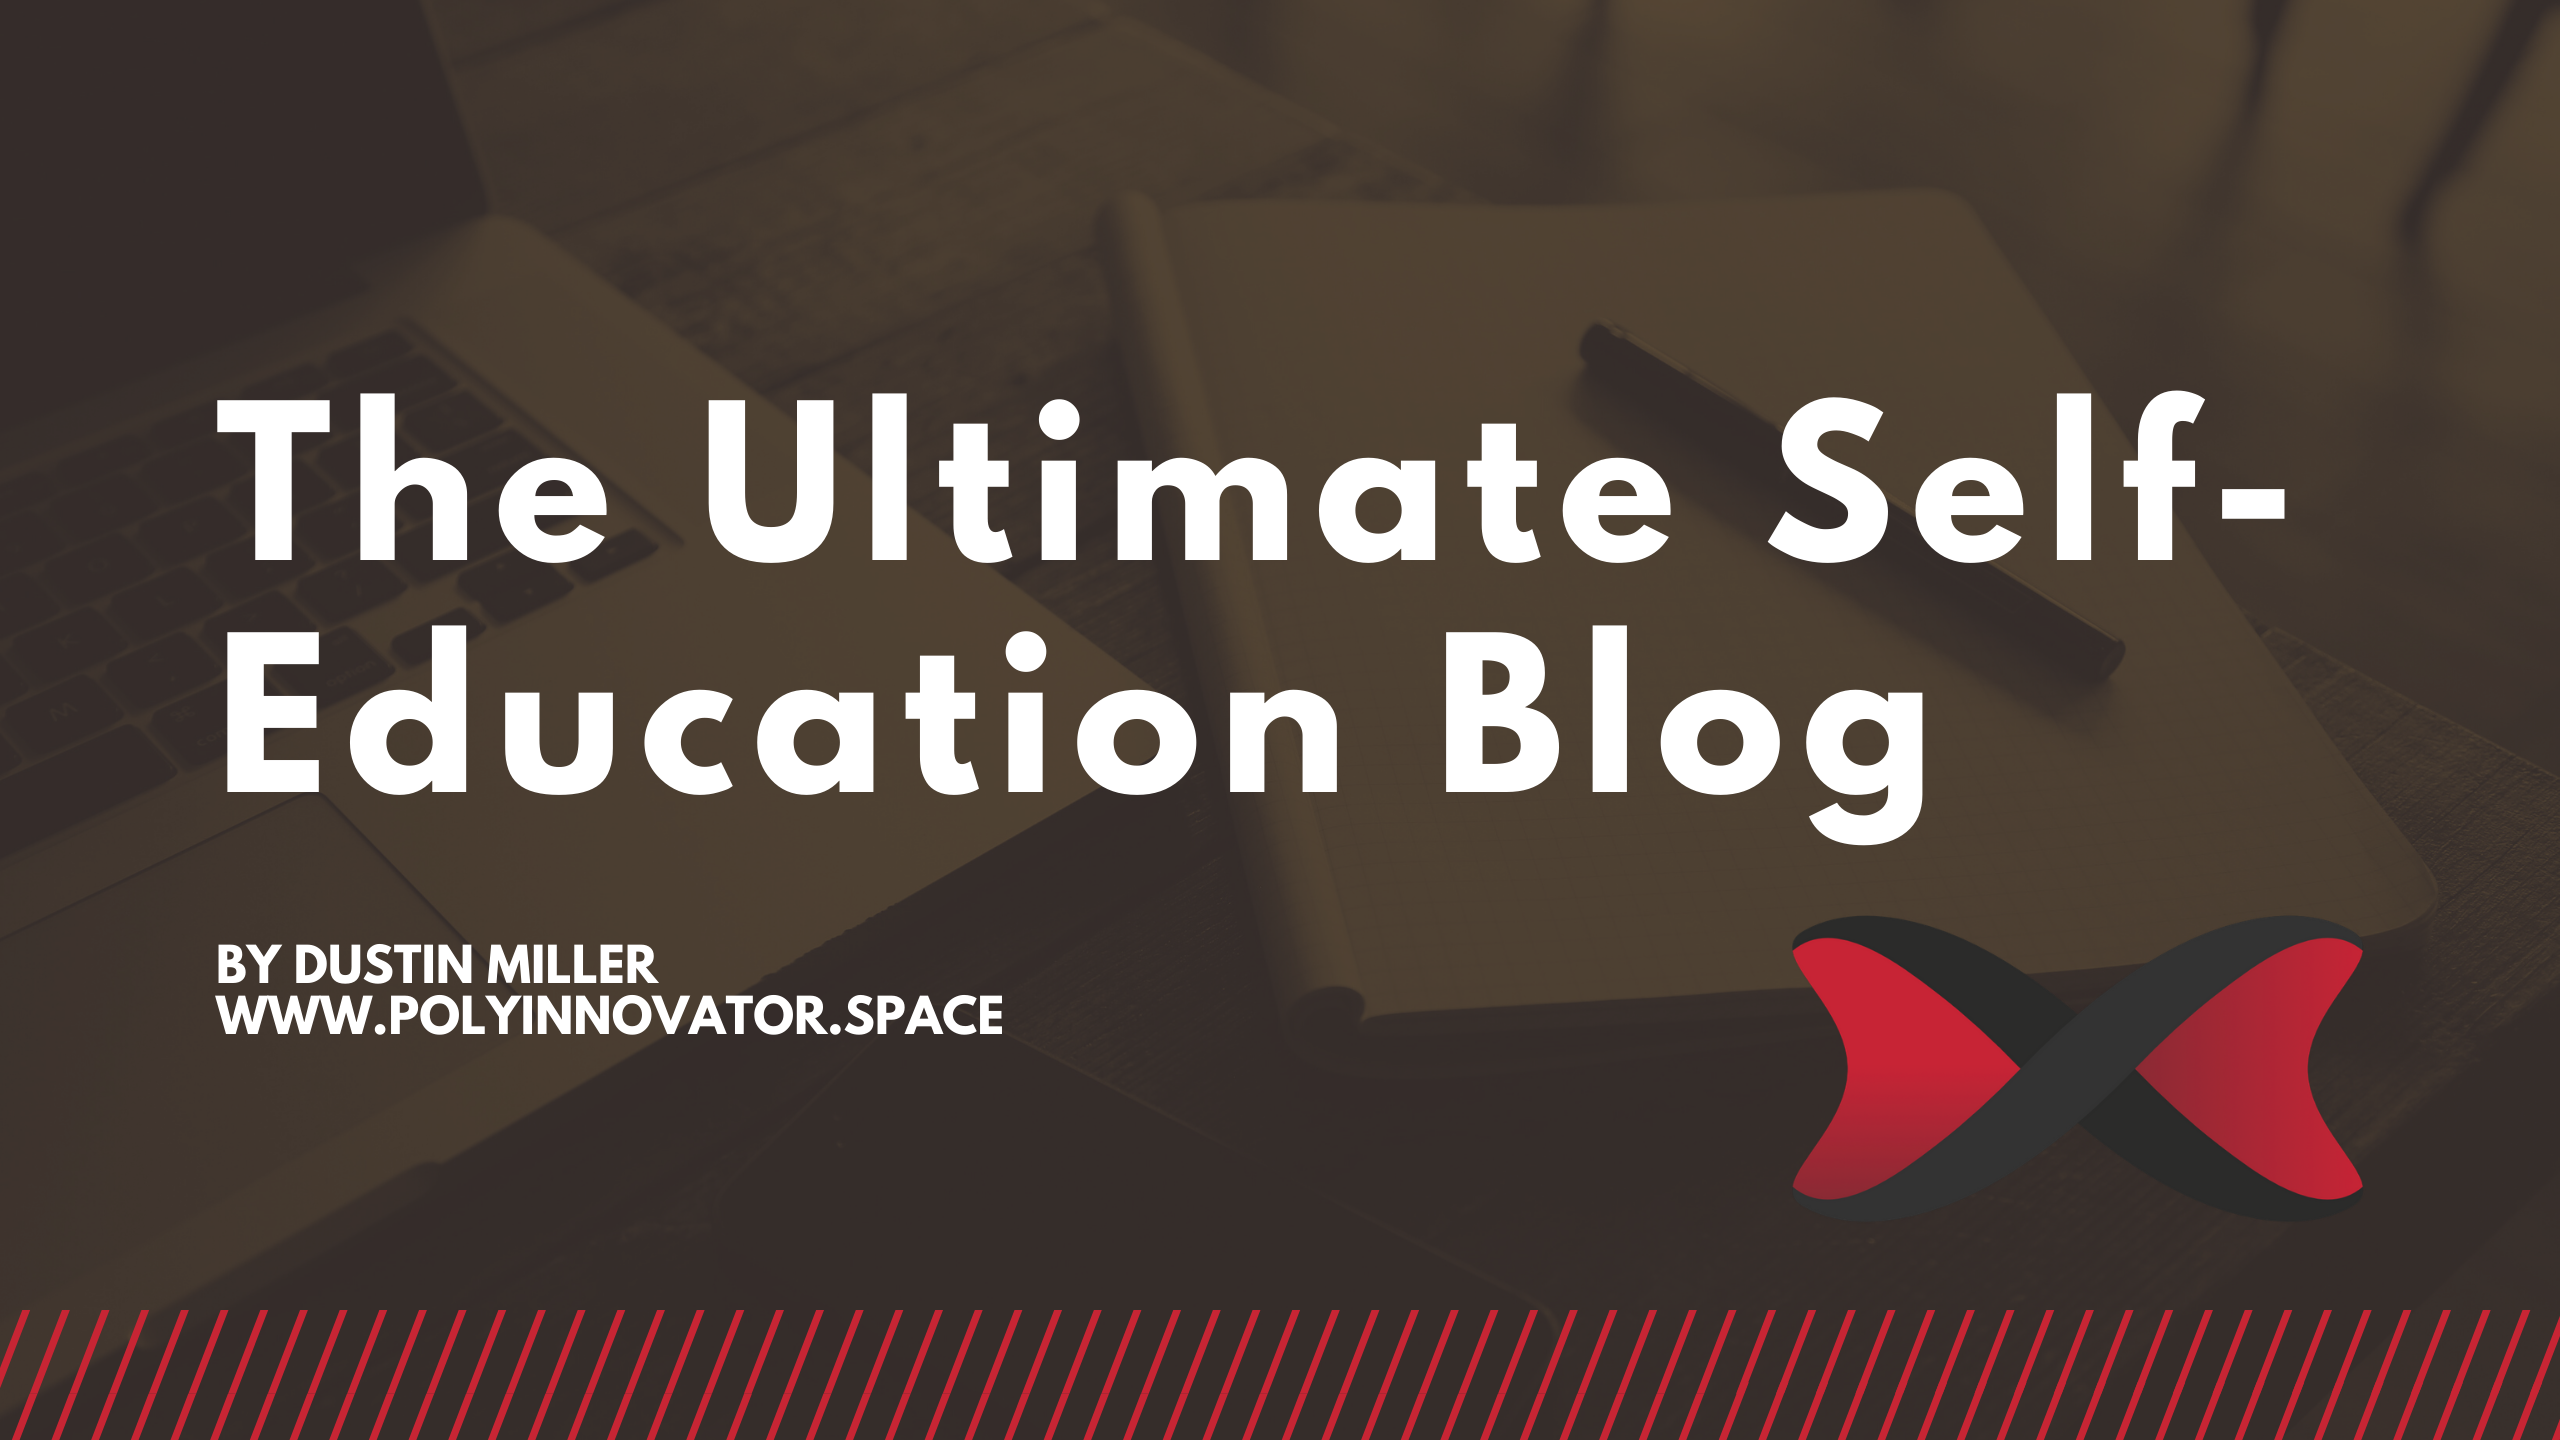 The Ultimate Self-Education Blog